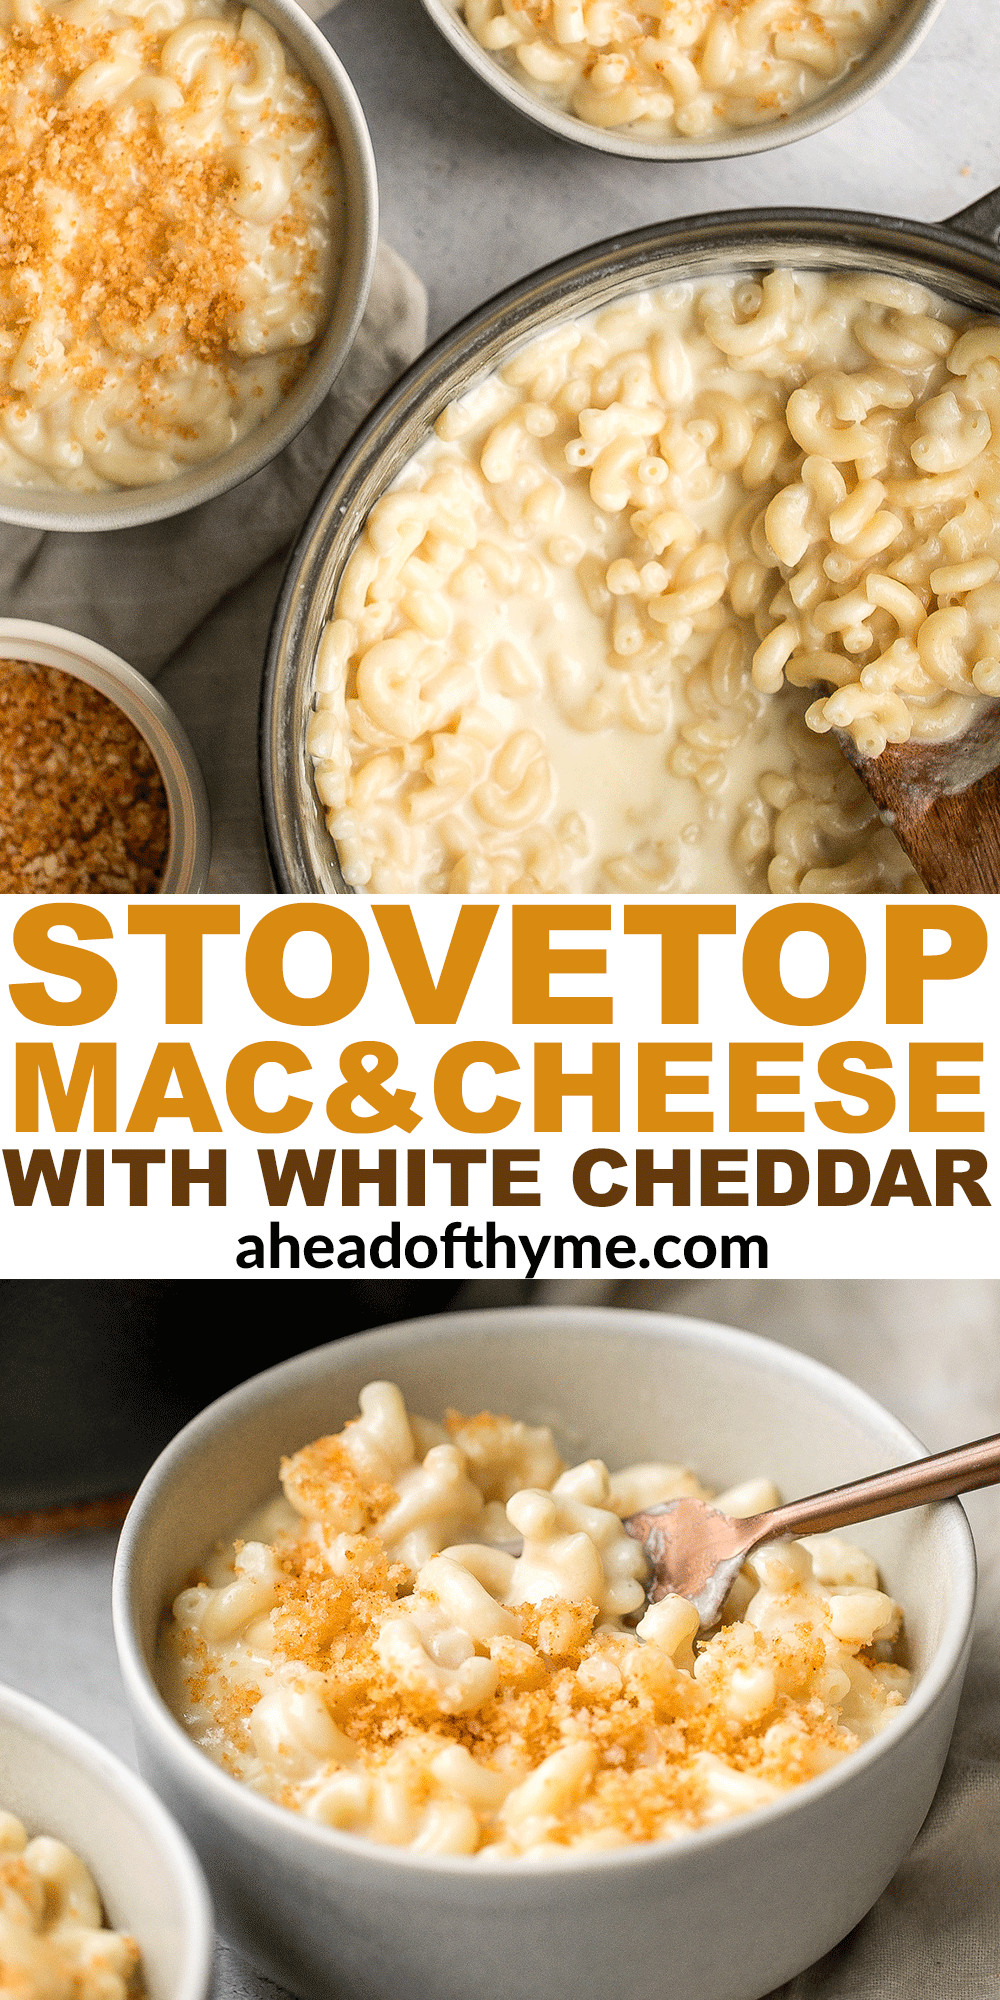 Stovetop Mac and Cheese with White Cheddar